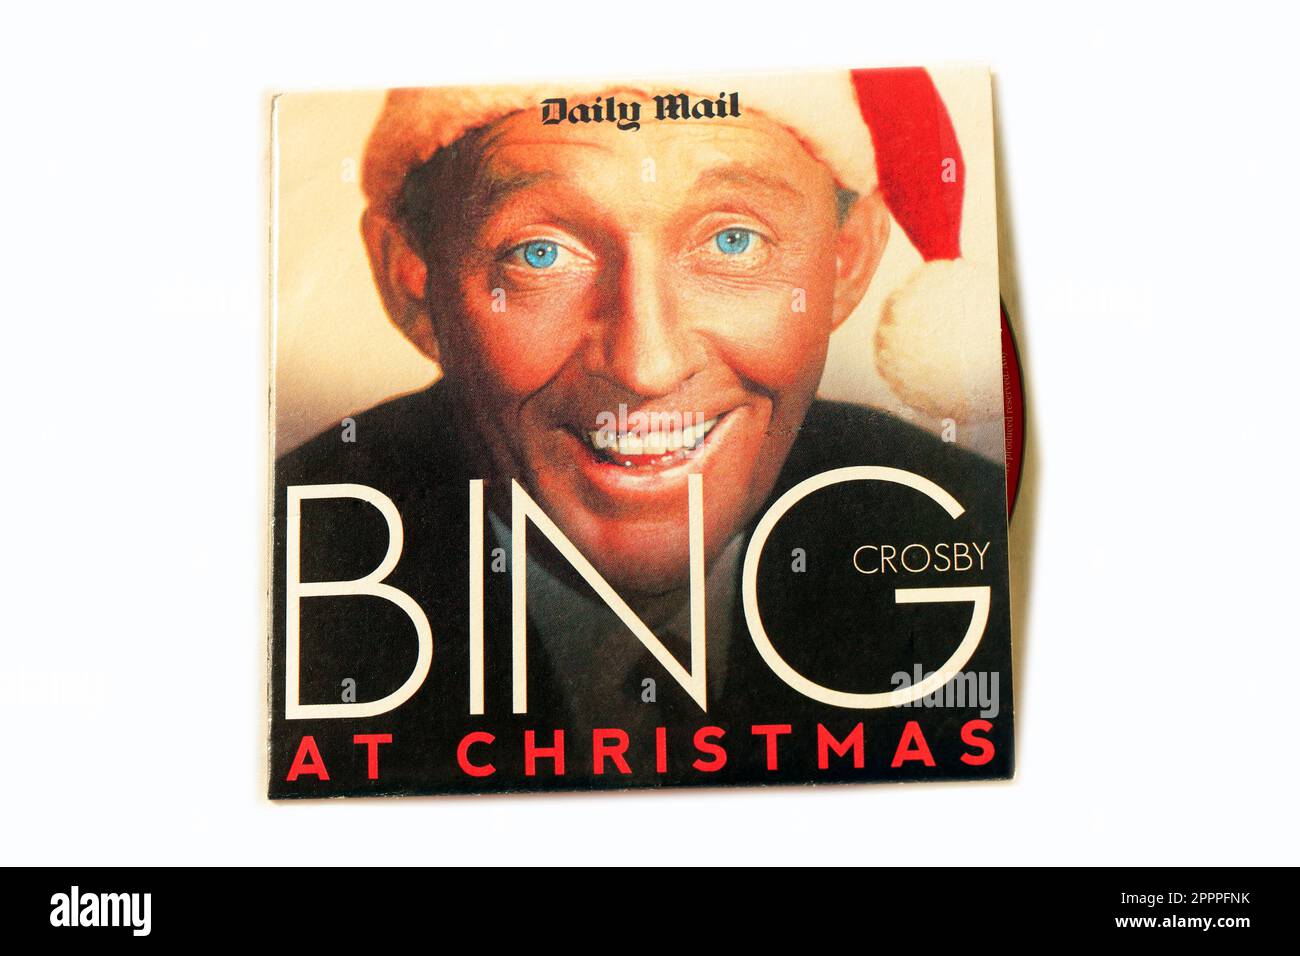 CD on white background - Daily Mail free cd - Bing Crosby at Christmas Stock Photo